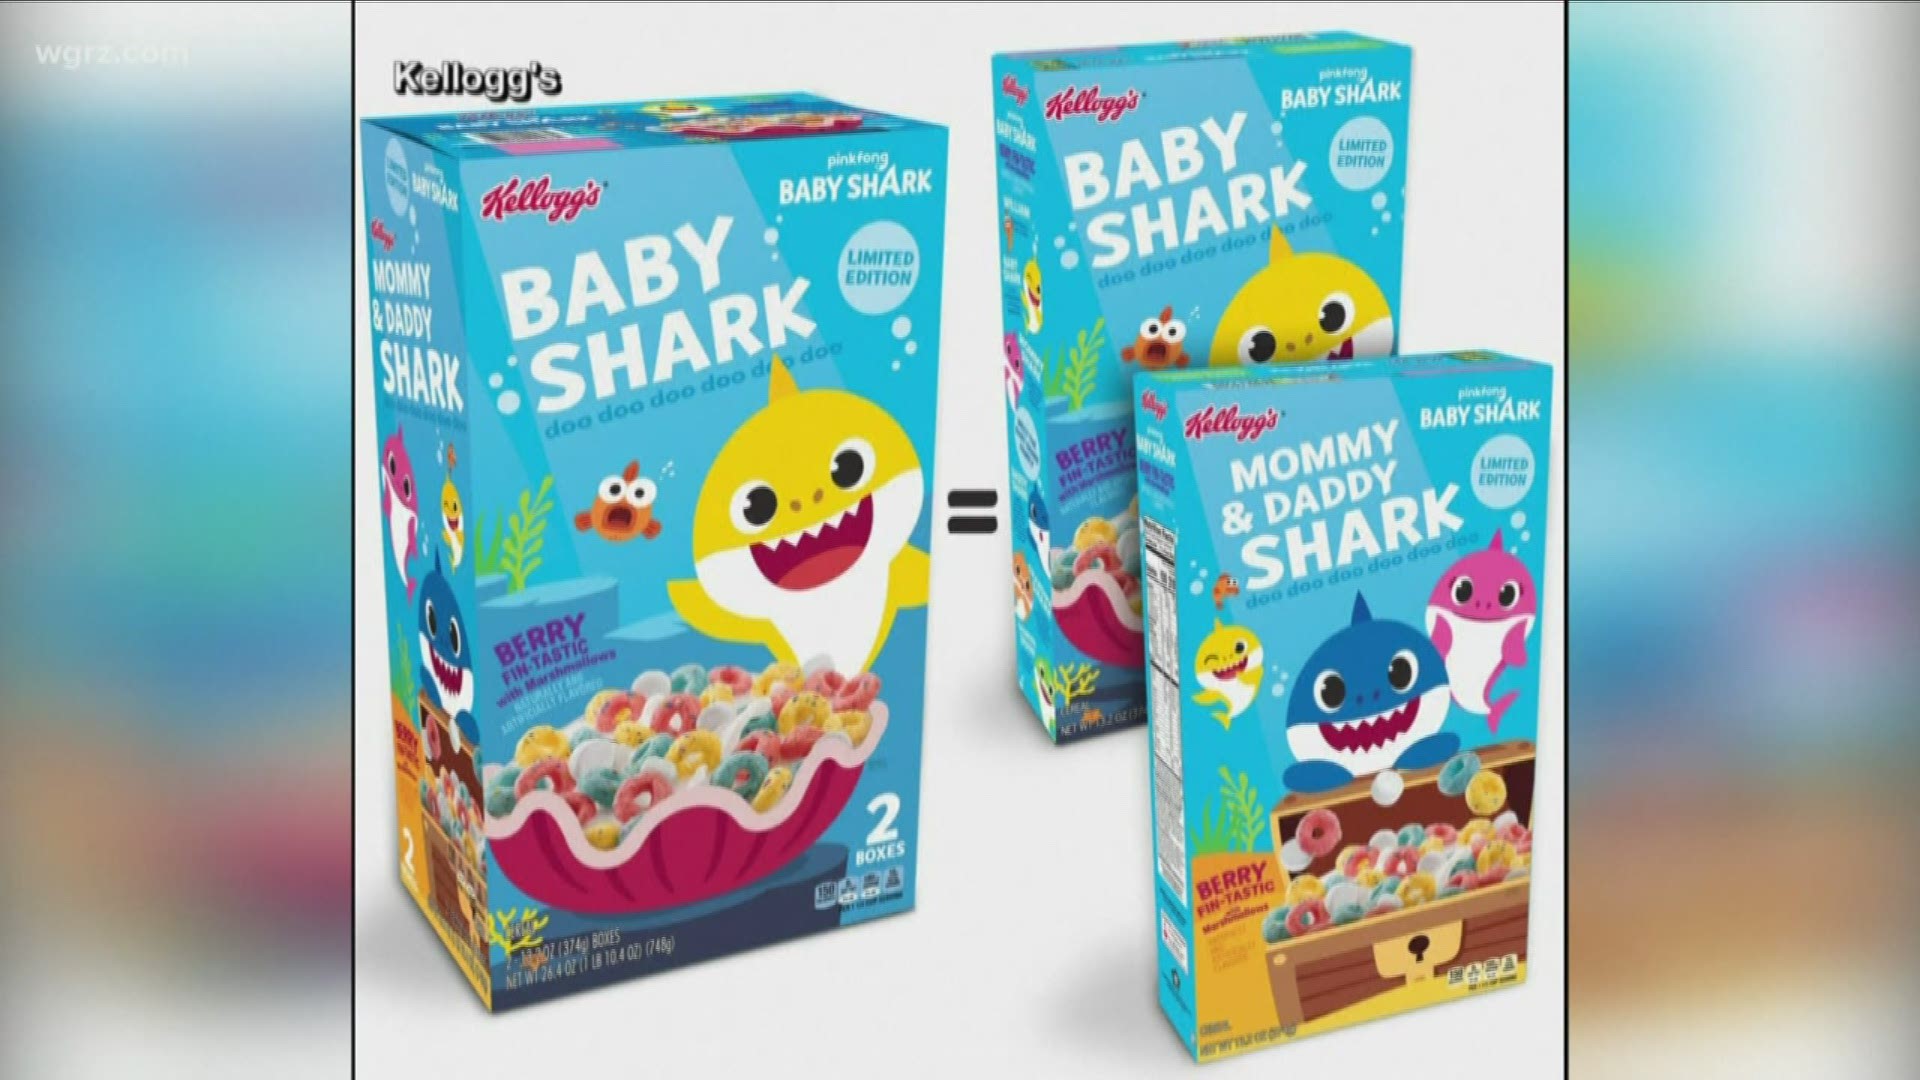 Kellogg's is launching a cereal inspired by "baby shark."